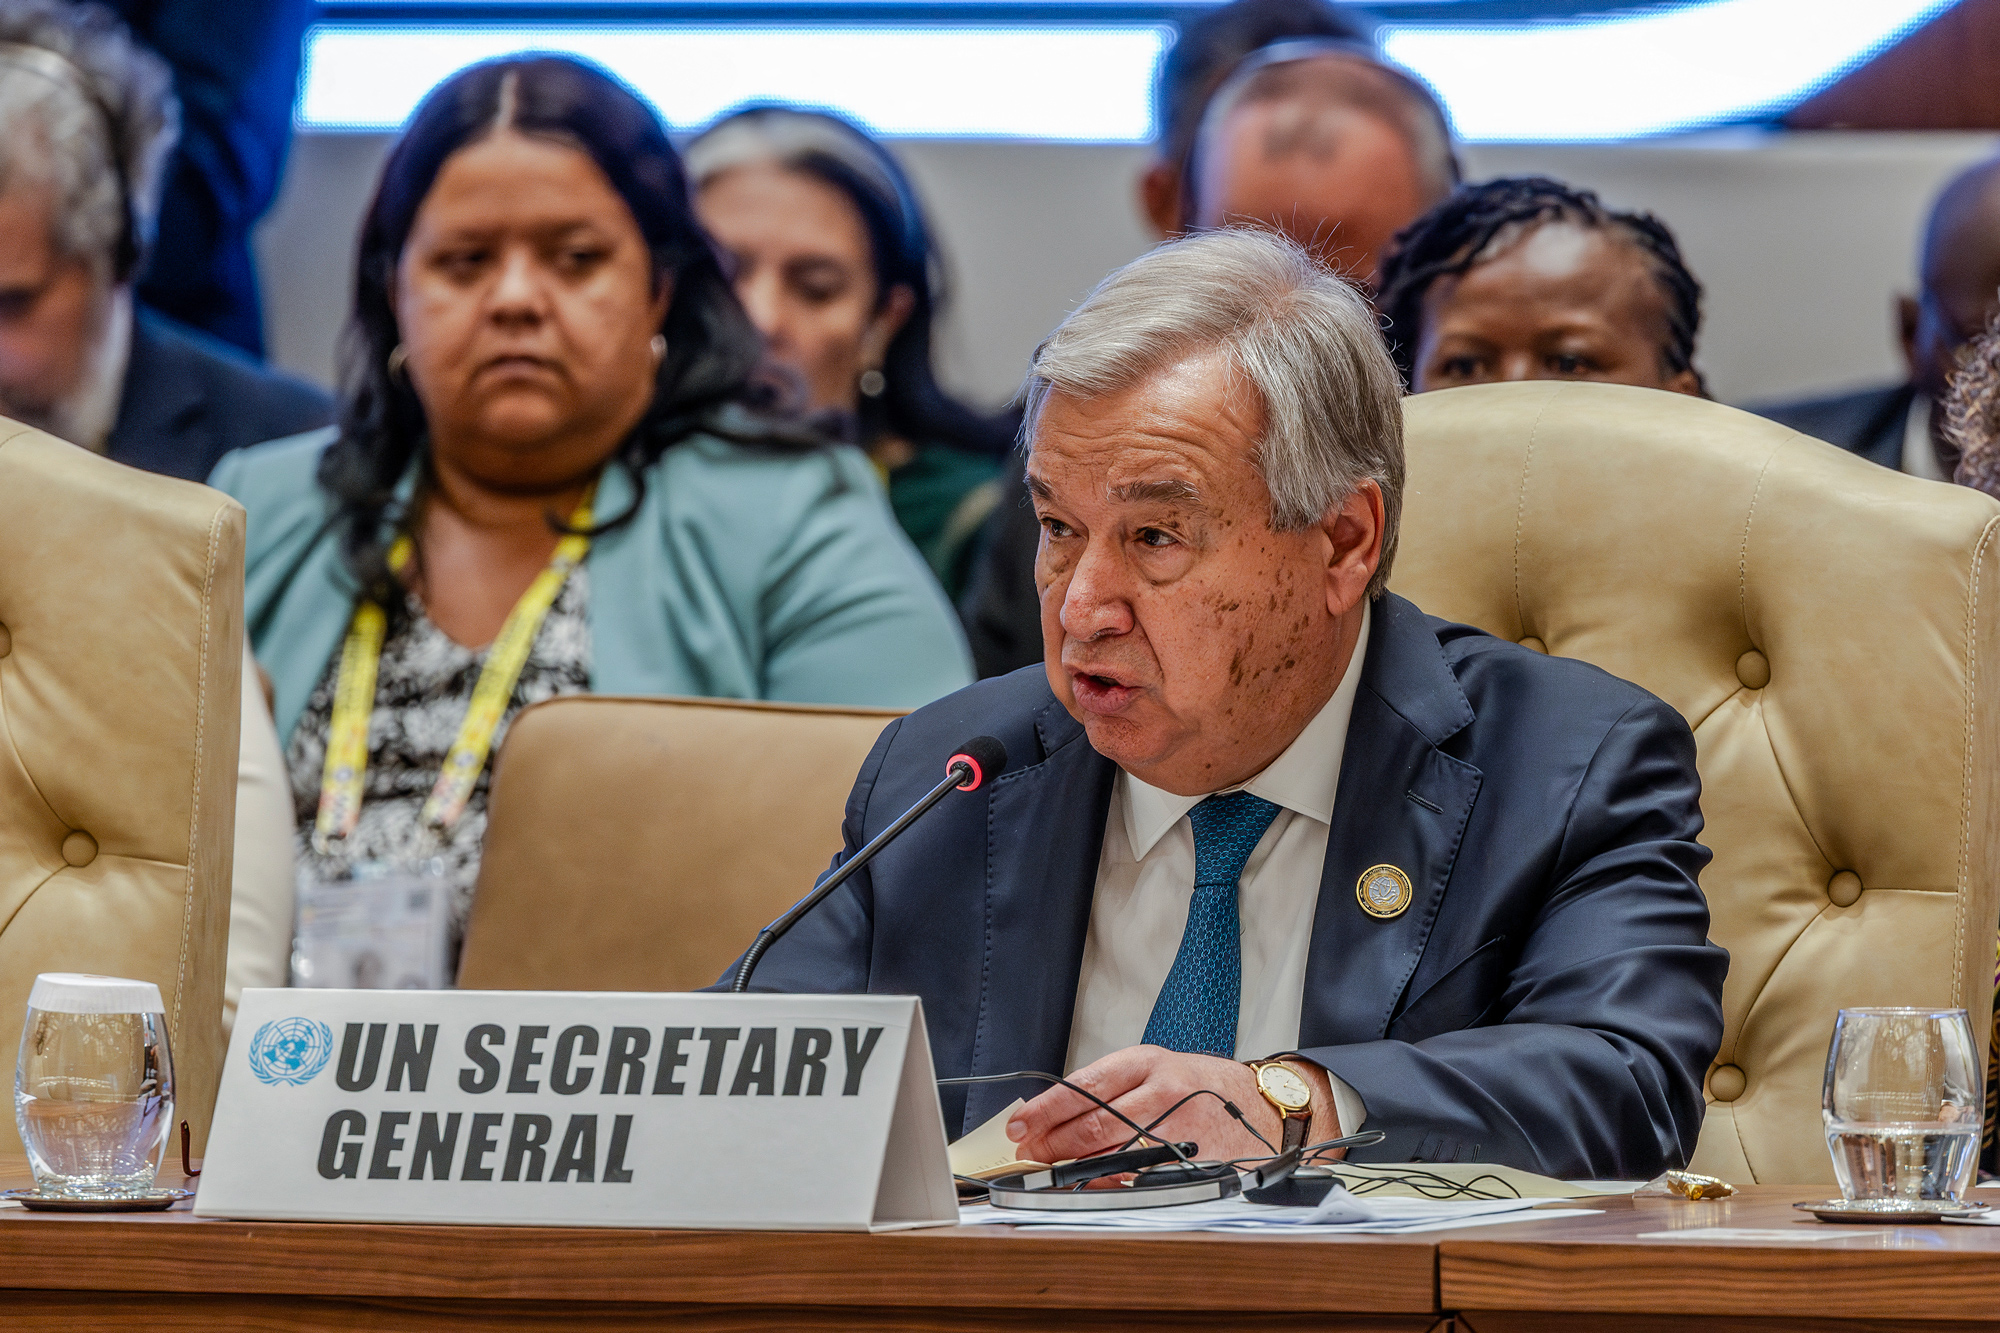 Secretary General of the United Nations Antonio Guterres delivers his speech during the closing session of the 19th Summit of Heads of State and Government of the Non-Aligned Movement (NAM) in Kampala, Uganda, on January 20.